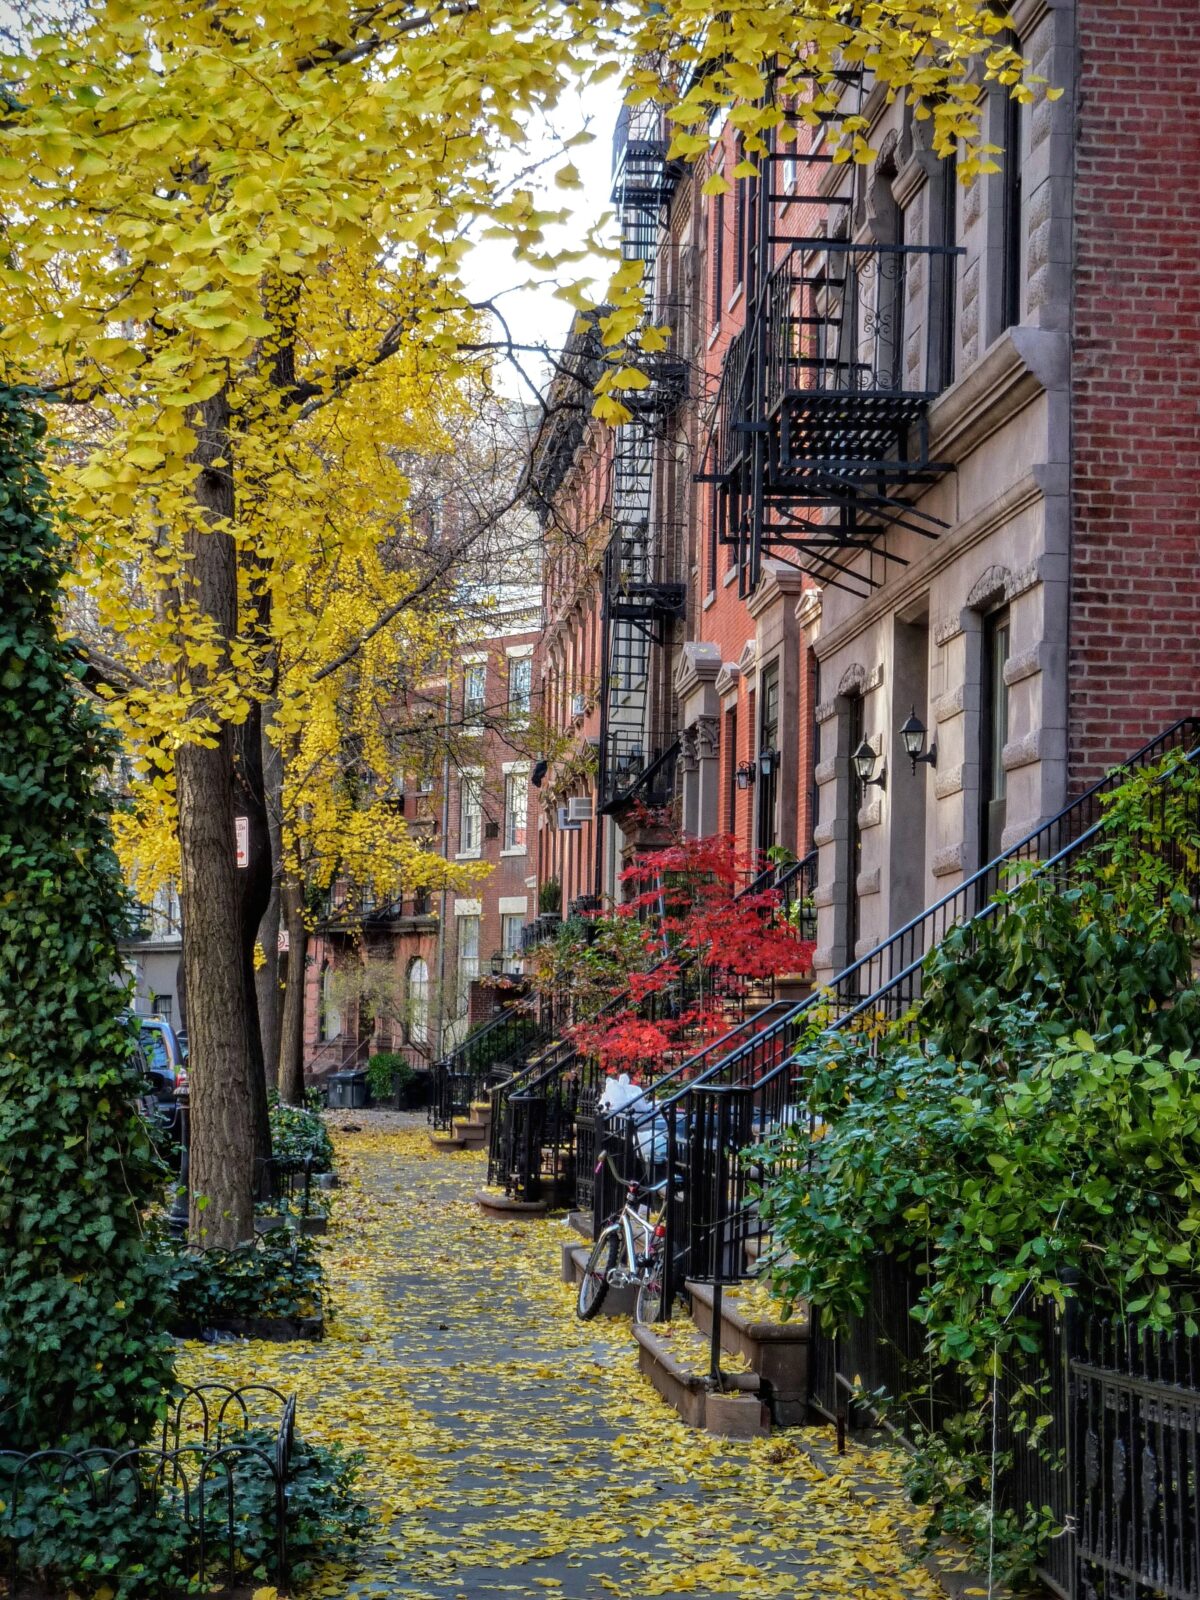 greenwich village street with historic old homes and brownstones